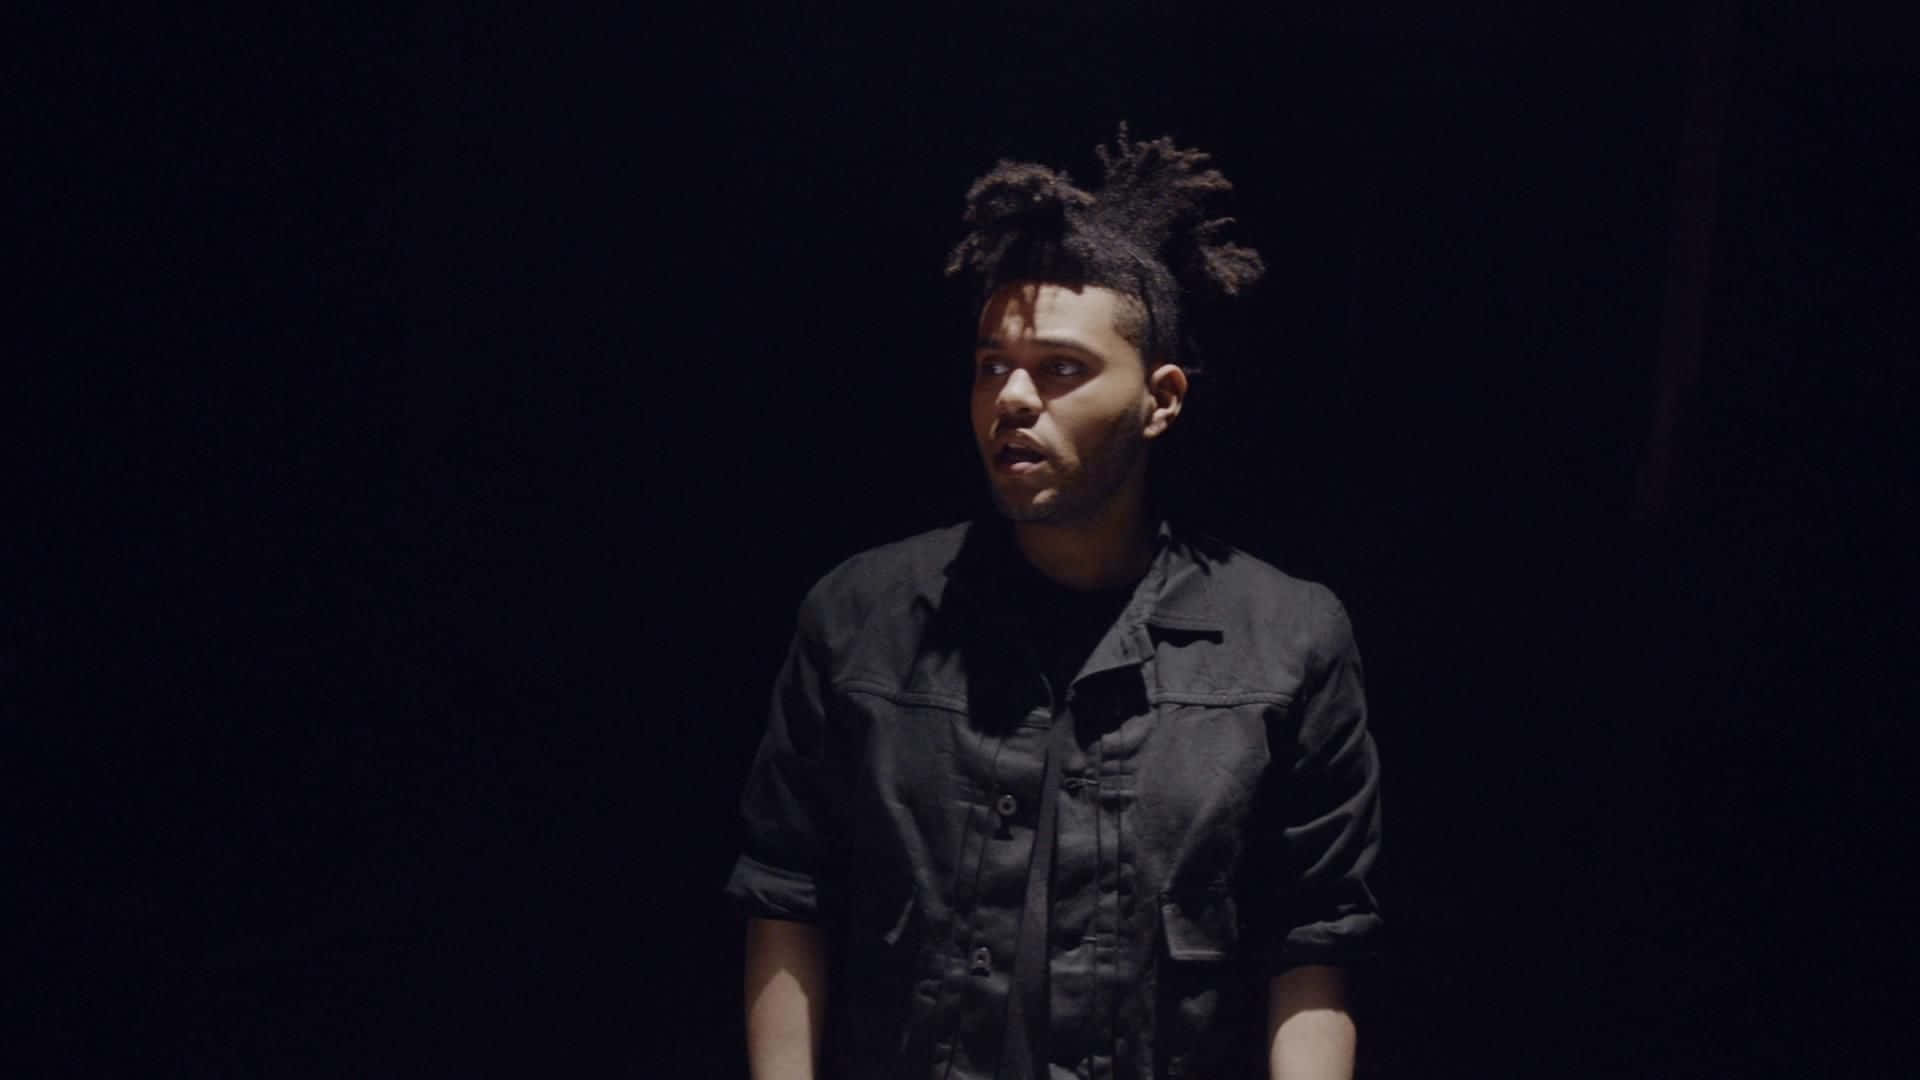 The Weeknd performing under the spotlight